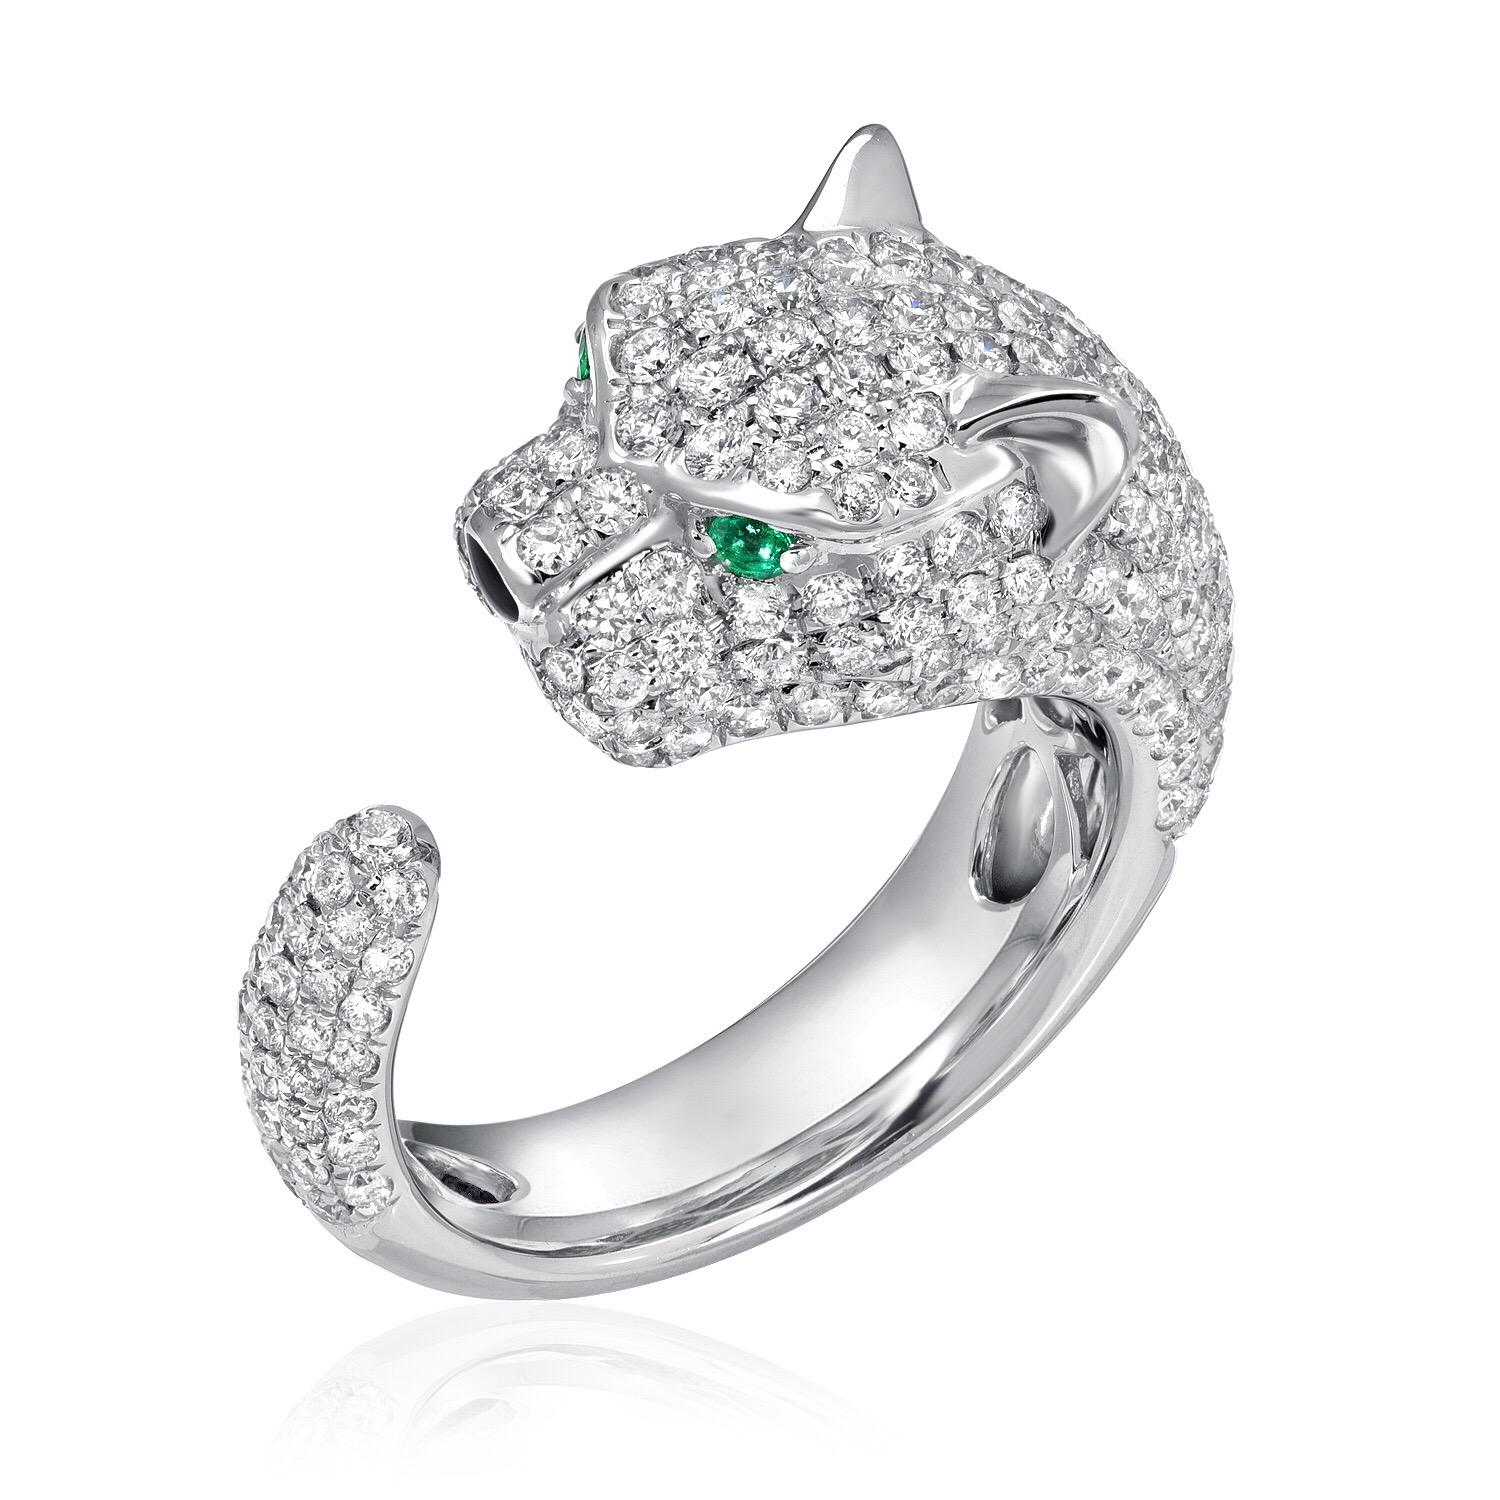 White gold diamond ring, featuring a Panther, set with a total of 2.48 carats of round brilliant diamonds and 0.07 carats of Emeralds in the eyes.
Diamond ring size 7.5. Resizing is complimentary upon request.
Returns are accepted and paid by us